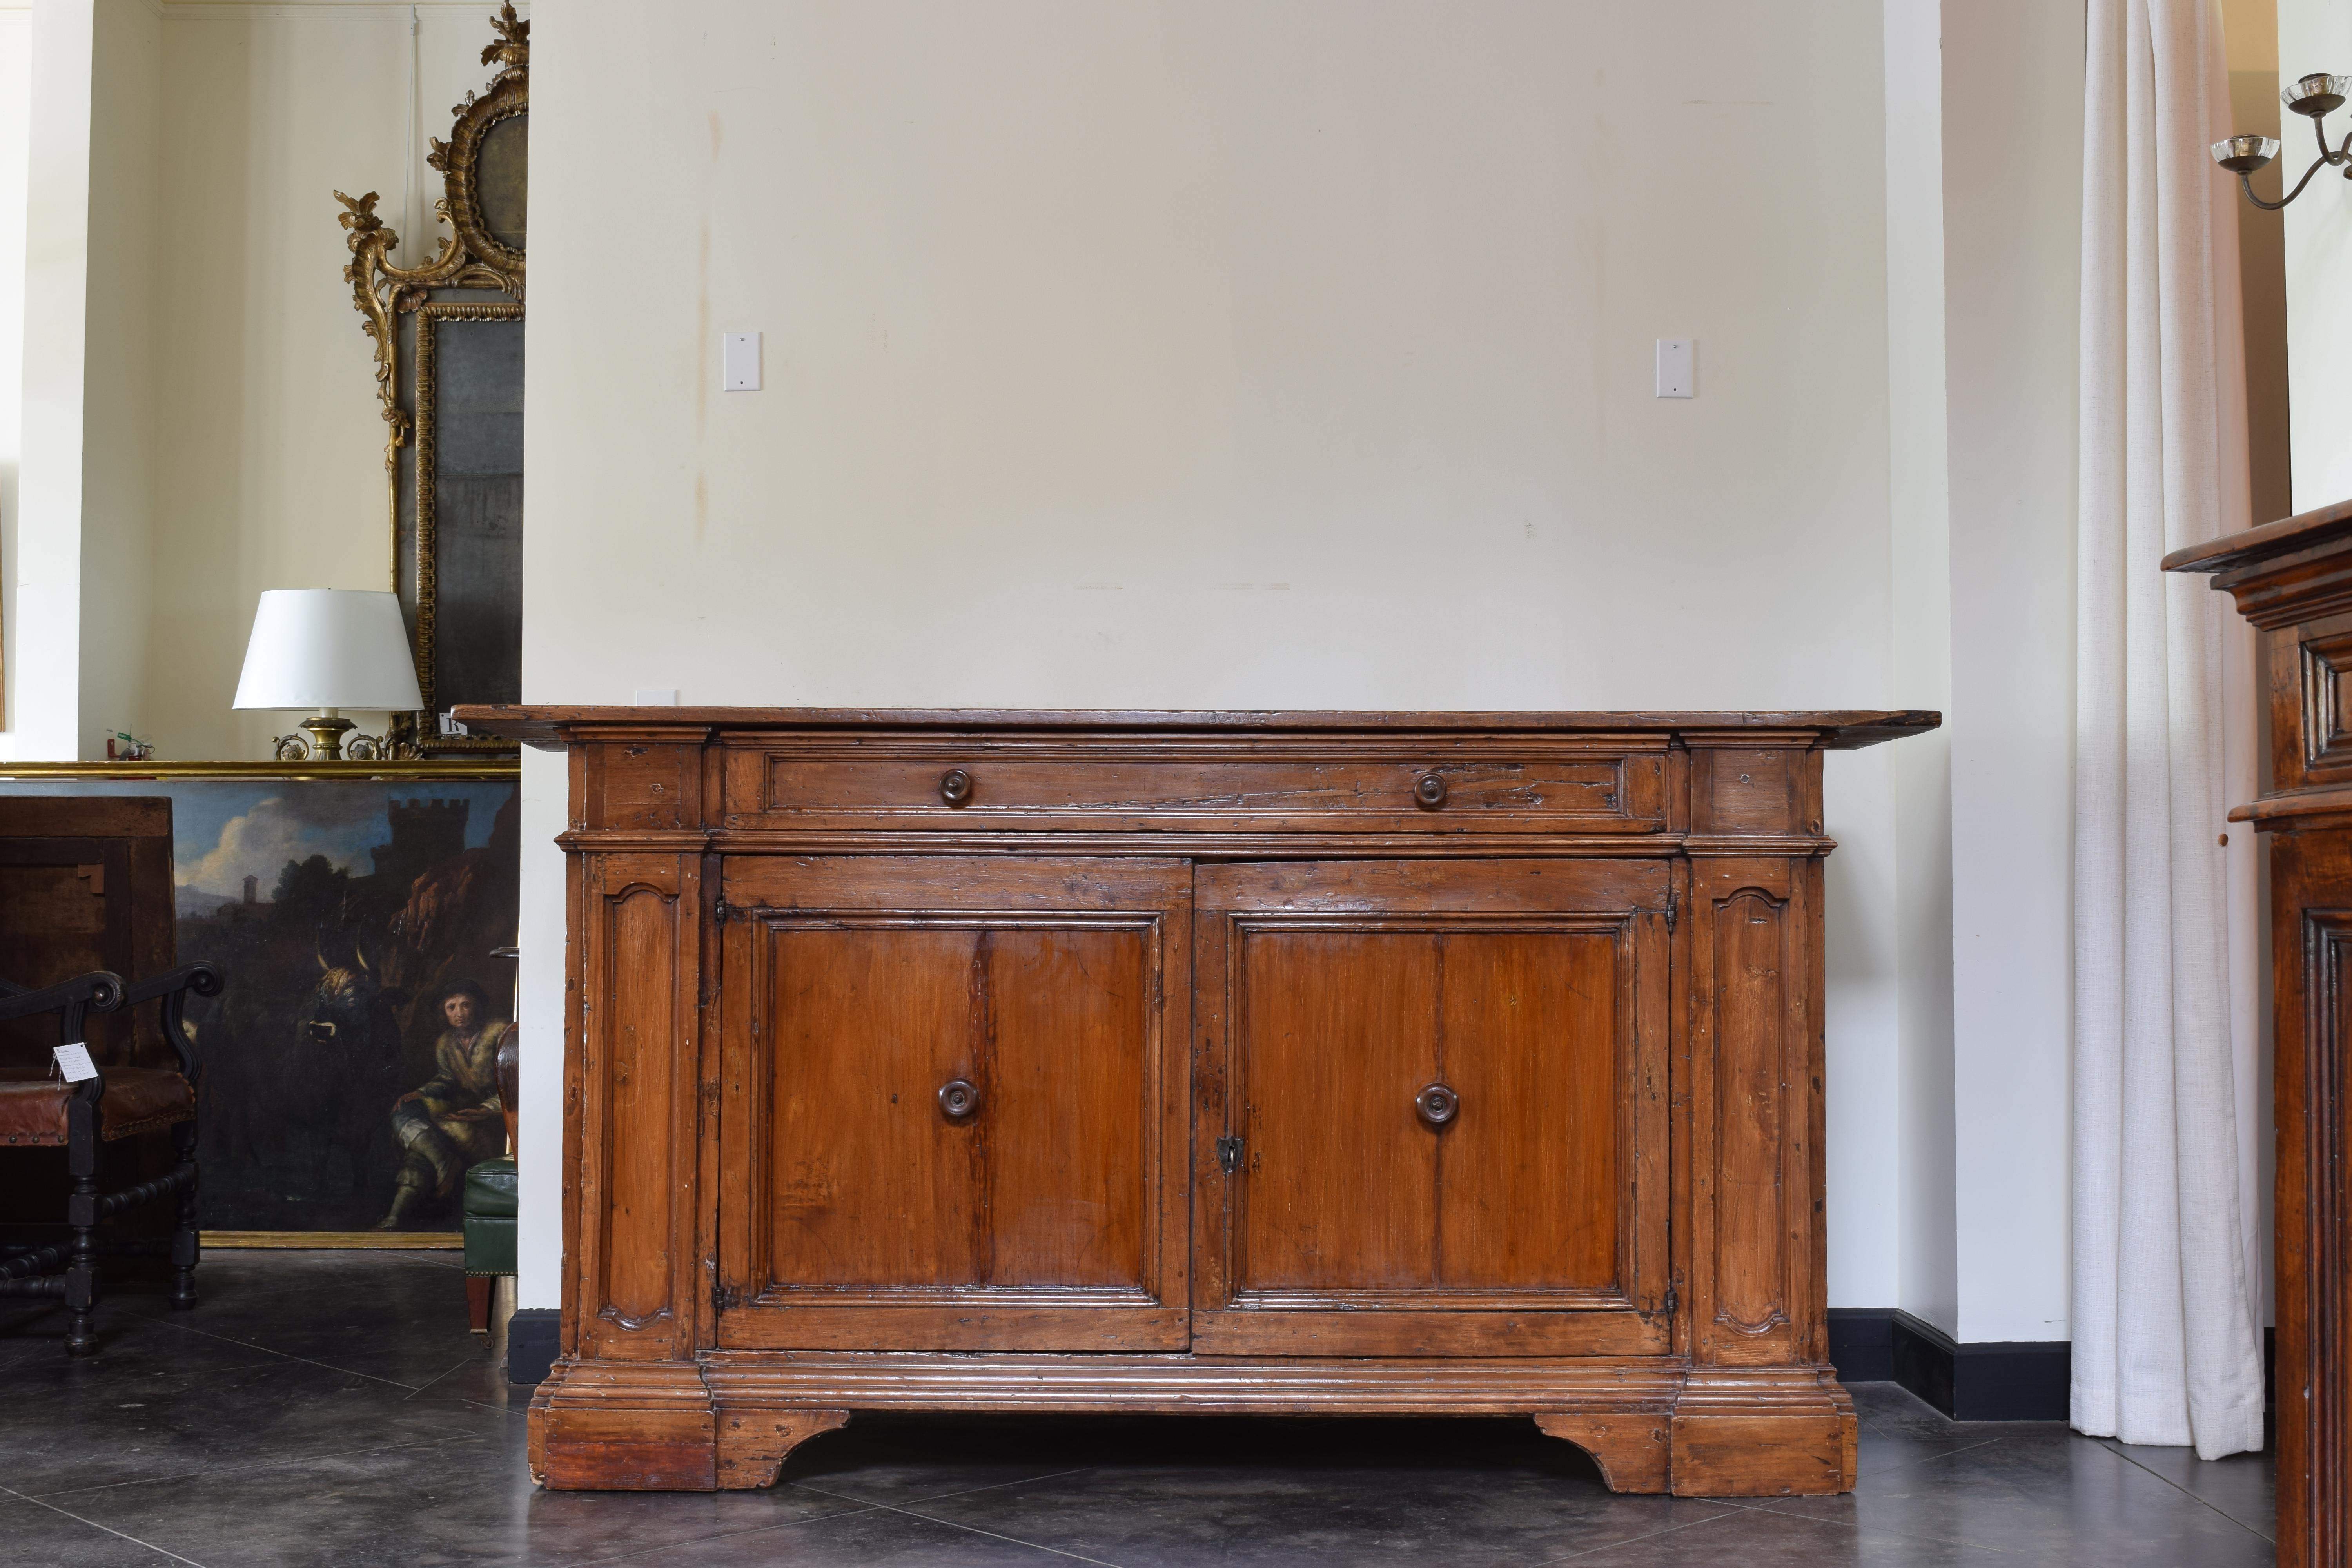 Likely Tuscan this larger scale credenza has a rectangular top above a conforming case housing one large drawer over a pair of paneled doors between recessed paneled pilasters, the interior upholstered, raised on large bracket feet, retaining turned